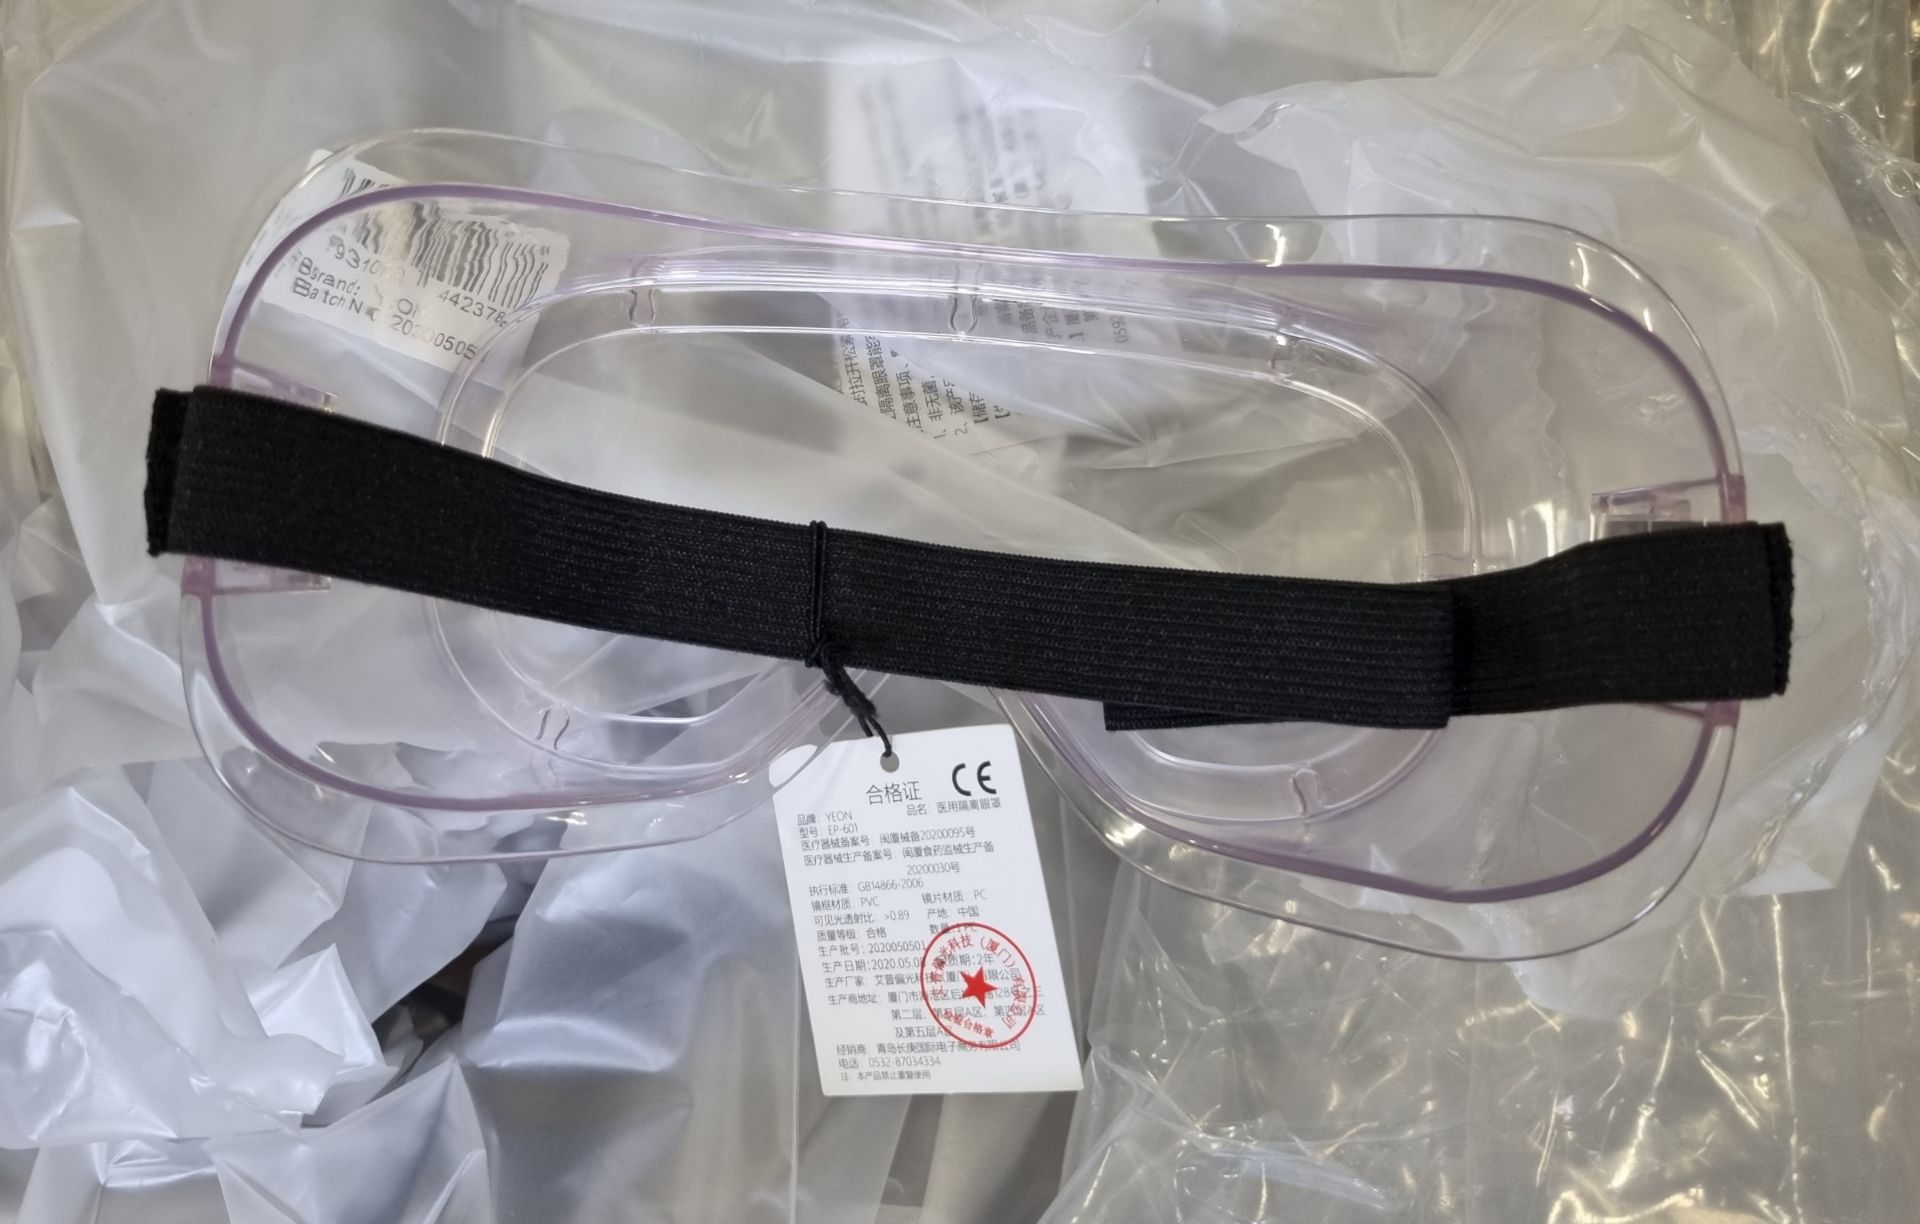 120 Yeon clear eye protection safety goggles with adjustable straps - Image 3 of 4